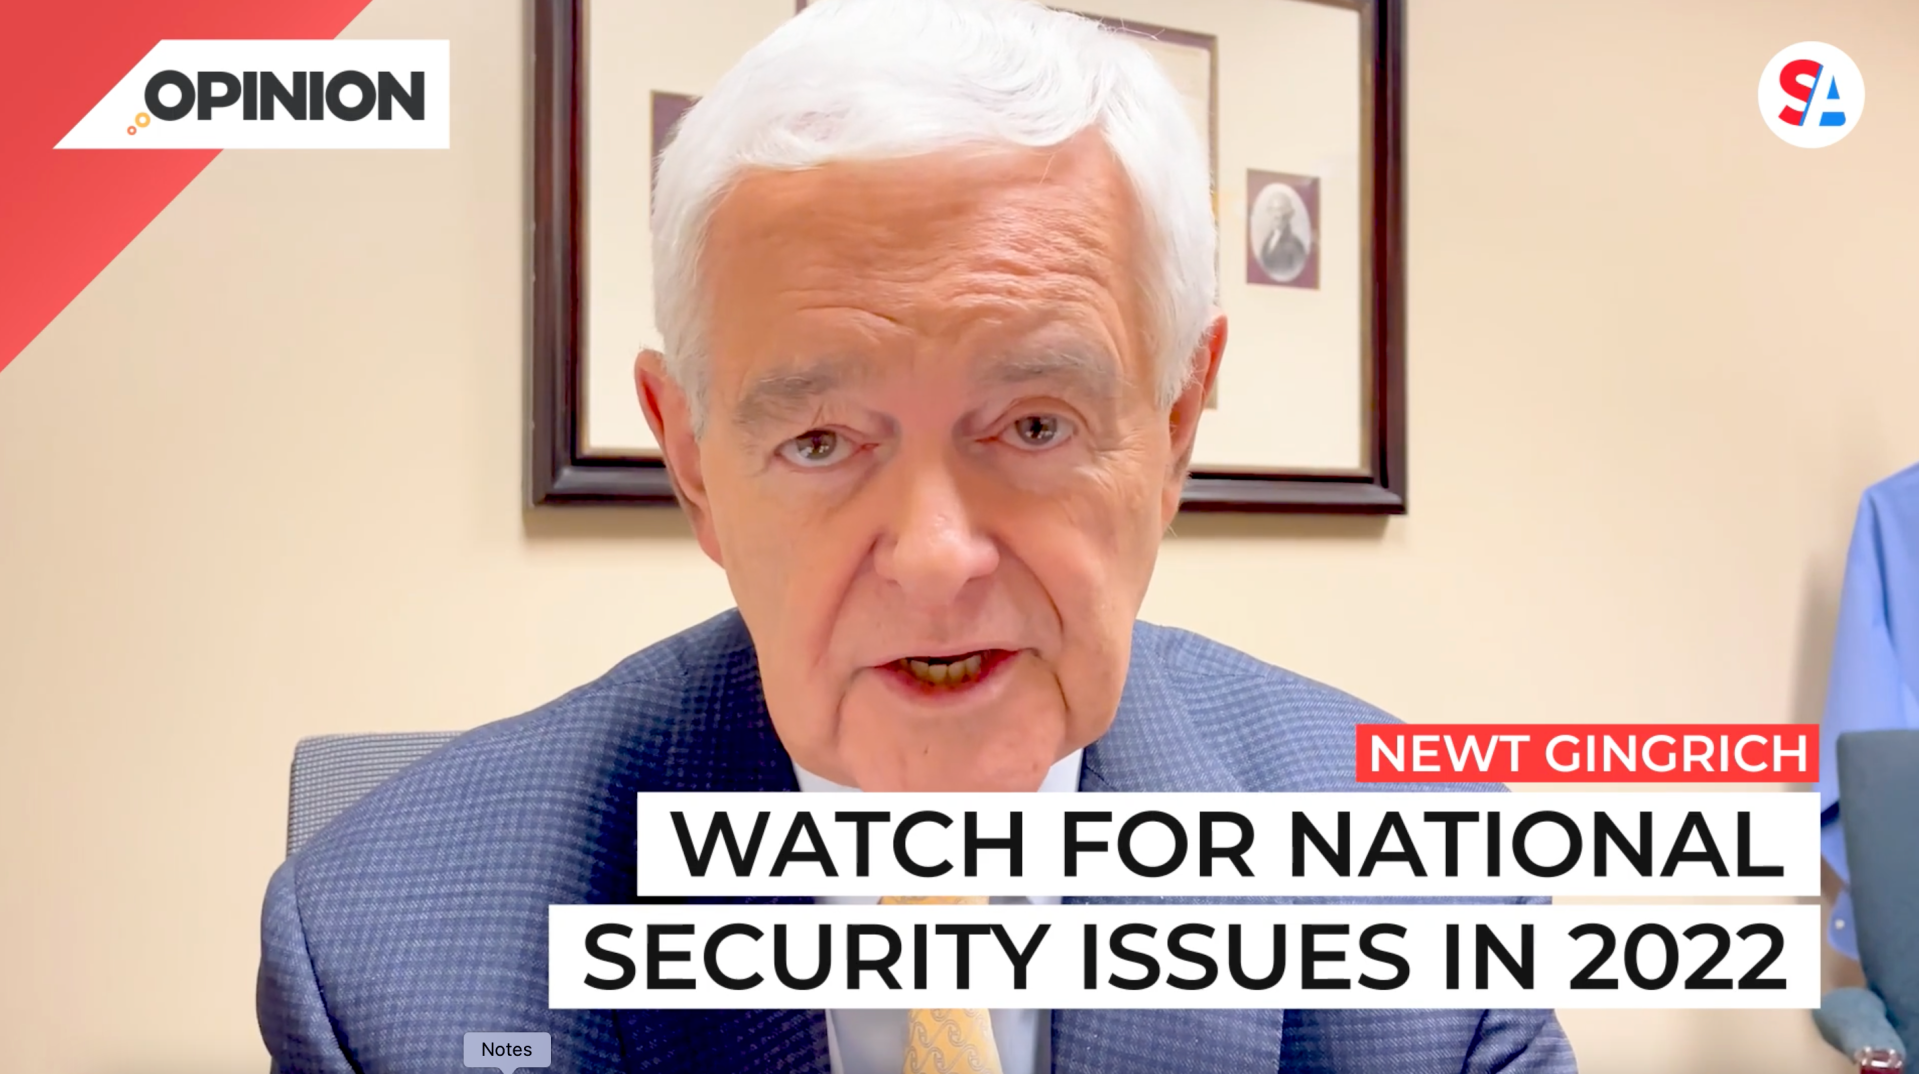 Newt Gingrich warns of national security issues in 2022.